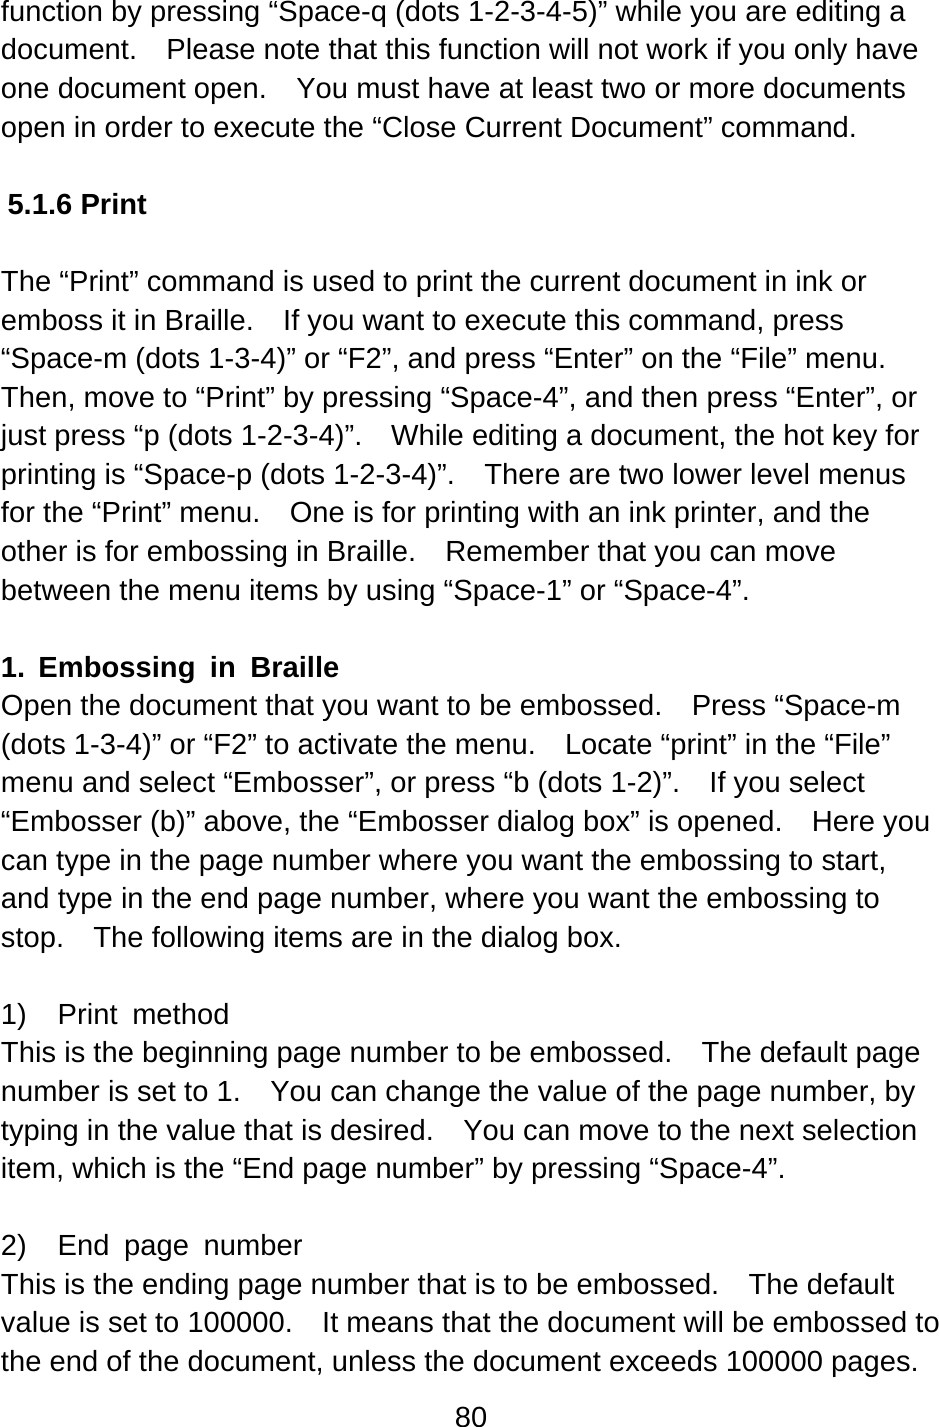 80  function by pressing “Space-q (dots 1-2-3-4-5)” while you are editing a document.    Please note that this function will not work if you only have one document open.    You must have at least two or more documents open in order to execute the “Close Current Document” command.  5.1.6 Print  The “Print” command is used to print the current document in ink or emboss it in Braille.    If you want to execute this command, press “Space-m (dots 1-3-4)” or “F2”, and press “Enter” on the “File” menu.   Then, move to “Print” by pressing “Space-4”, and then press “Enter”, or just press “p (dots 1-2-3-4)”.  While editing a document, the hot key for printing is “Space-p (dots 1-2-3-4)”.    There are two lower level menus for the “Print” menu.    One is for printing with an ink printer, and the other is for embossing in Braille.    Remember that you can move between the menu items by using “Space-1” or “Space-4”.  1. Embossing in Braille Open the document that you want to be embossed.  Press “Space-m (dots 1-3-4)” or “F2” to activate the menu.    Locate “print” in the “File” menu and select “Embosser”, or press “b (dots 1-2)”.    If you select “Embosser (b)” above, the “Embosser dialog box” is opened.    Here you can type in the page number where you want the embossing to start, and type in the end page number, where you want the embossing to stop.    The following items are in the dialog box.  1)  Print method This is the beginning page number to be embossed.    The default page number is set to 1.    You can change the value of the page number, by typing in the value that is desired.    You can move to the next selection item, which is the “End page number” by pressing “Space-4”.  2)  End page number This is the ending page number that is to be embossed.    The default value is set to 100000.    It means that the document will be embossed to the end of the document, unless the document exceeds 100000 pages.   